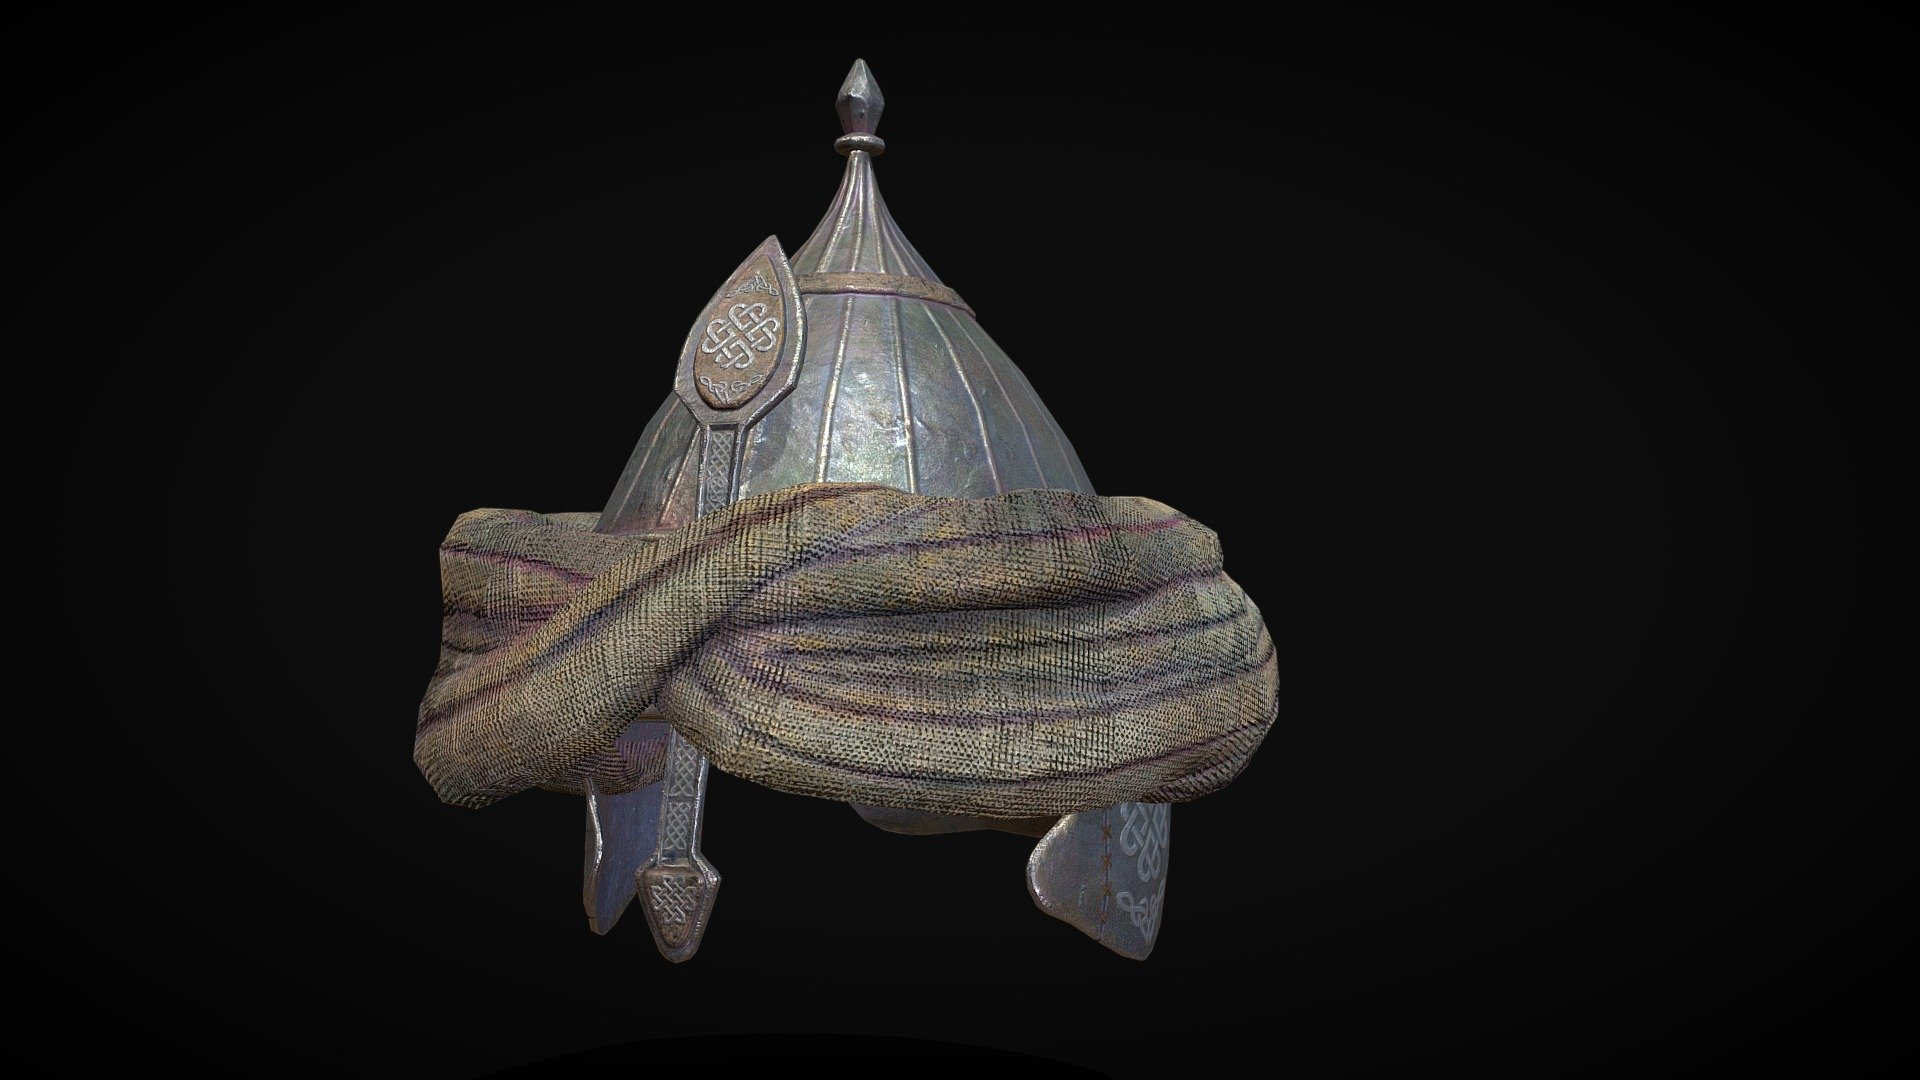 Made for Faes AR an #RPG #AR #Game #app a Turban Helm with #zbrush #Maya #substancepainter and #marmoset if you want commission works for games, 3d print or argames I can do it 3d model